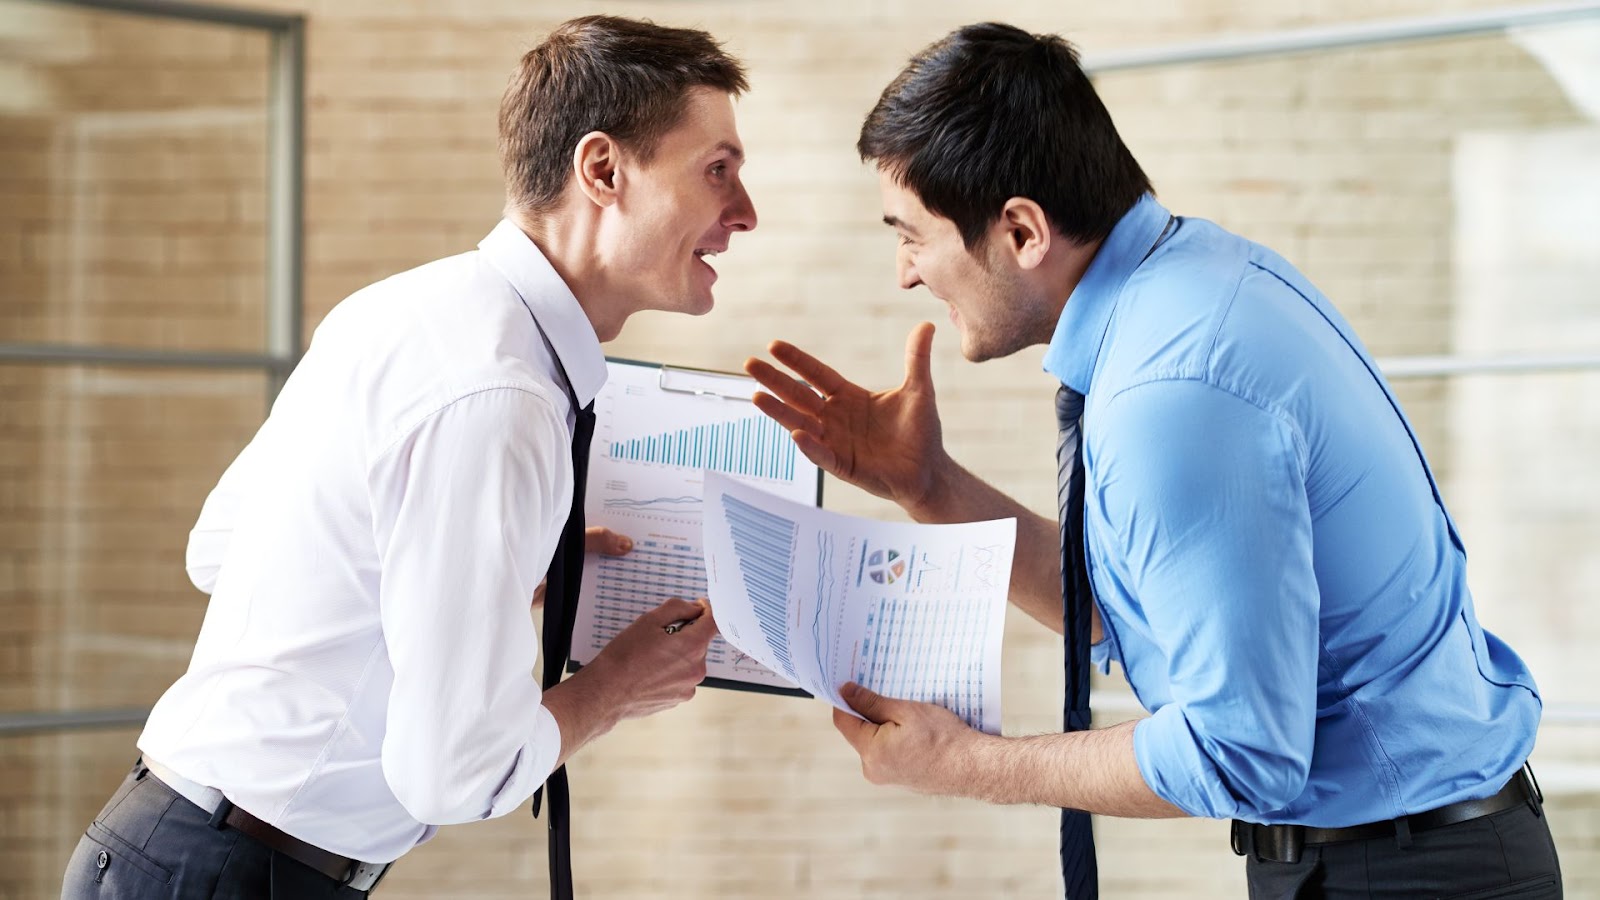 Two businessmen in a heated discussion, leaning towards each other with expressive gestures, holding papers with financial data.